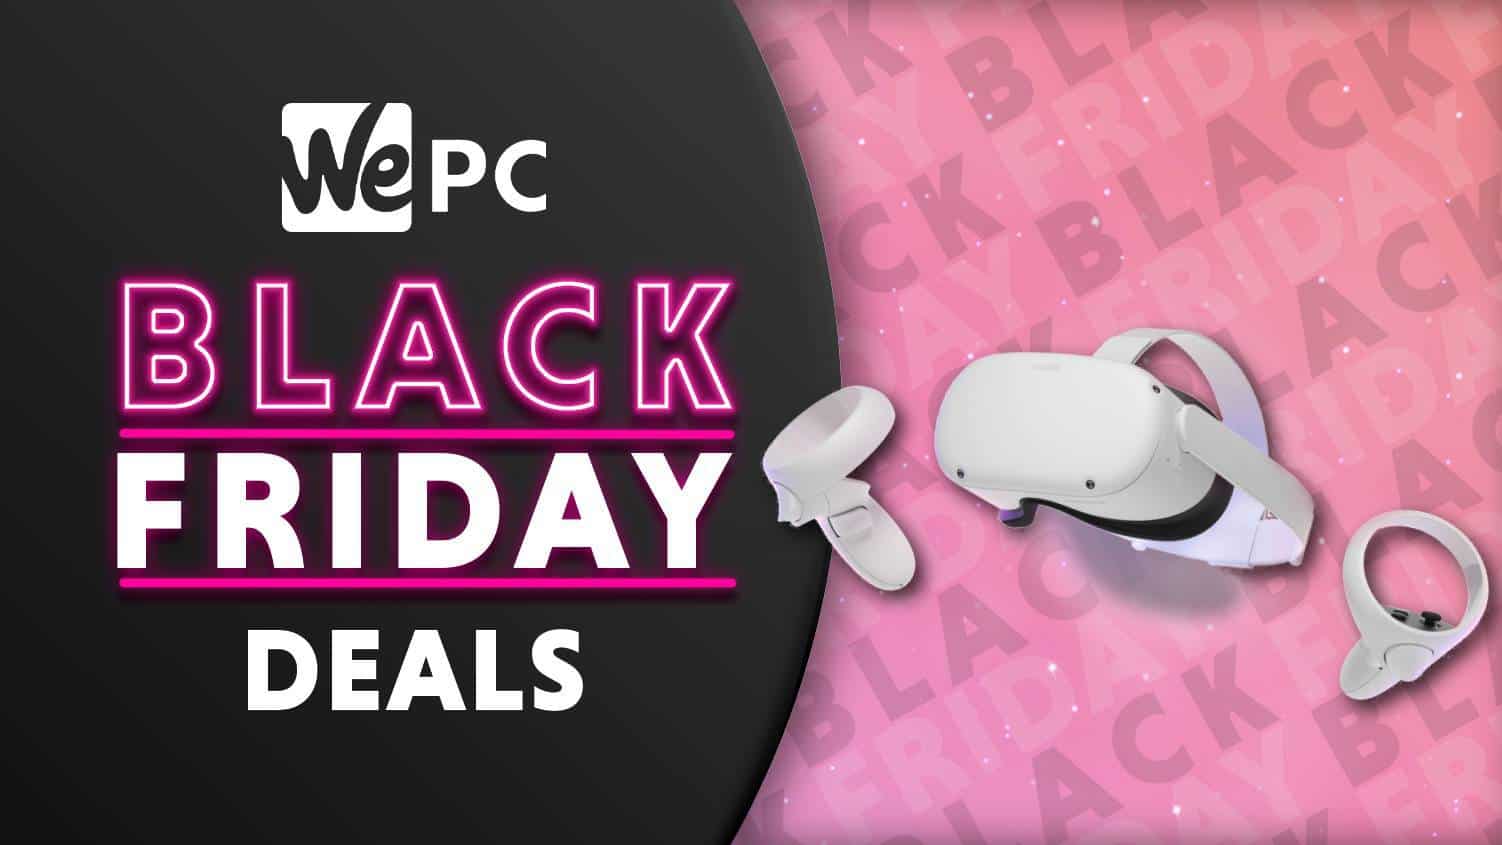 Save $50 on an Oculus Quest 2 Black Friday deal